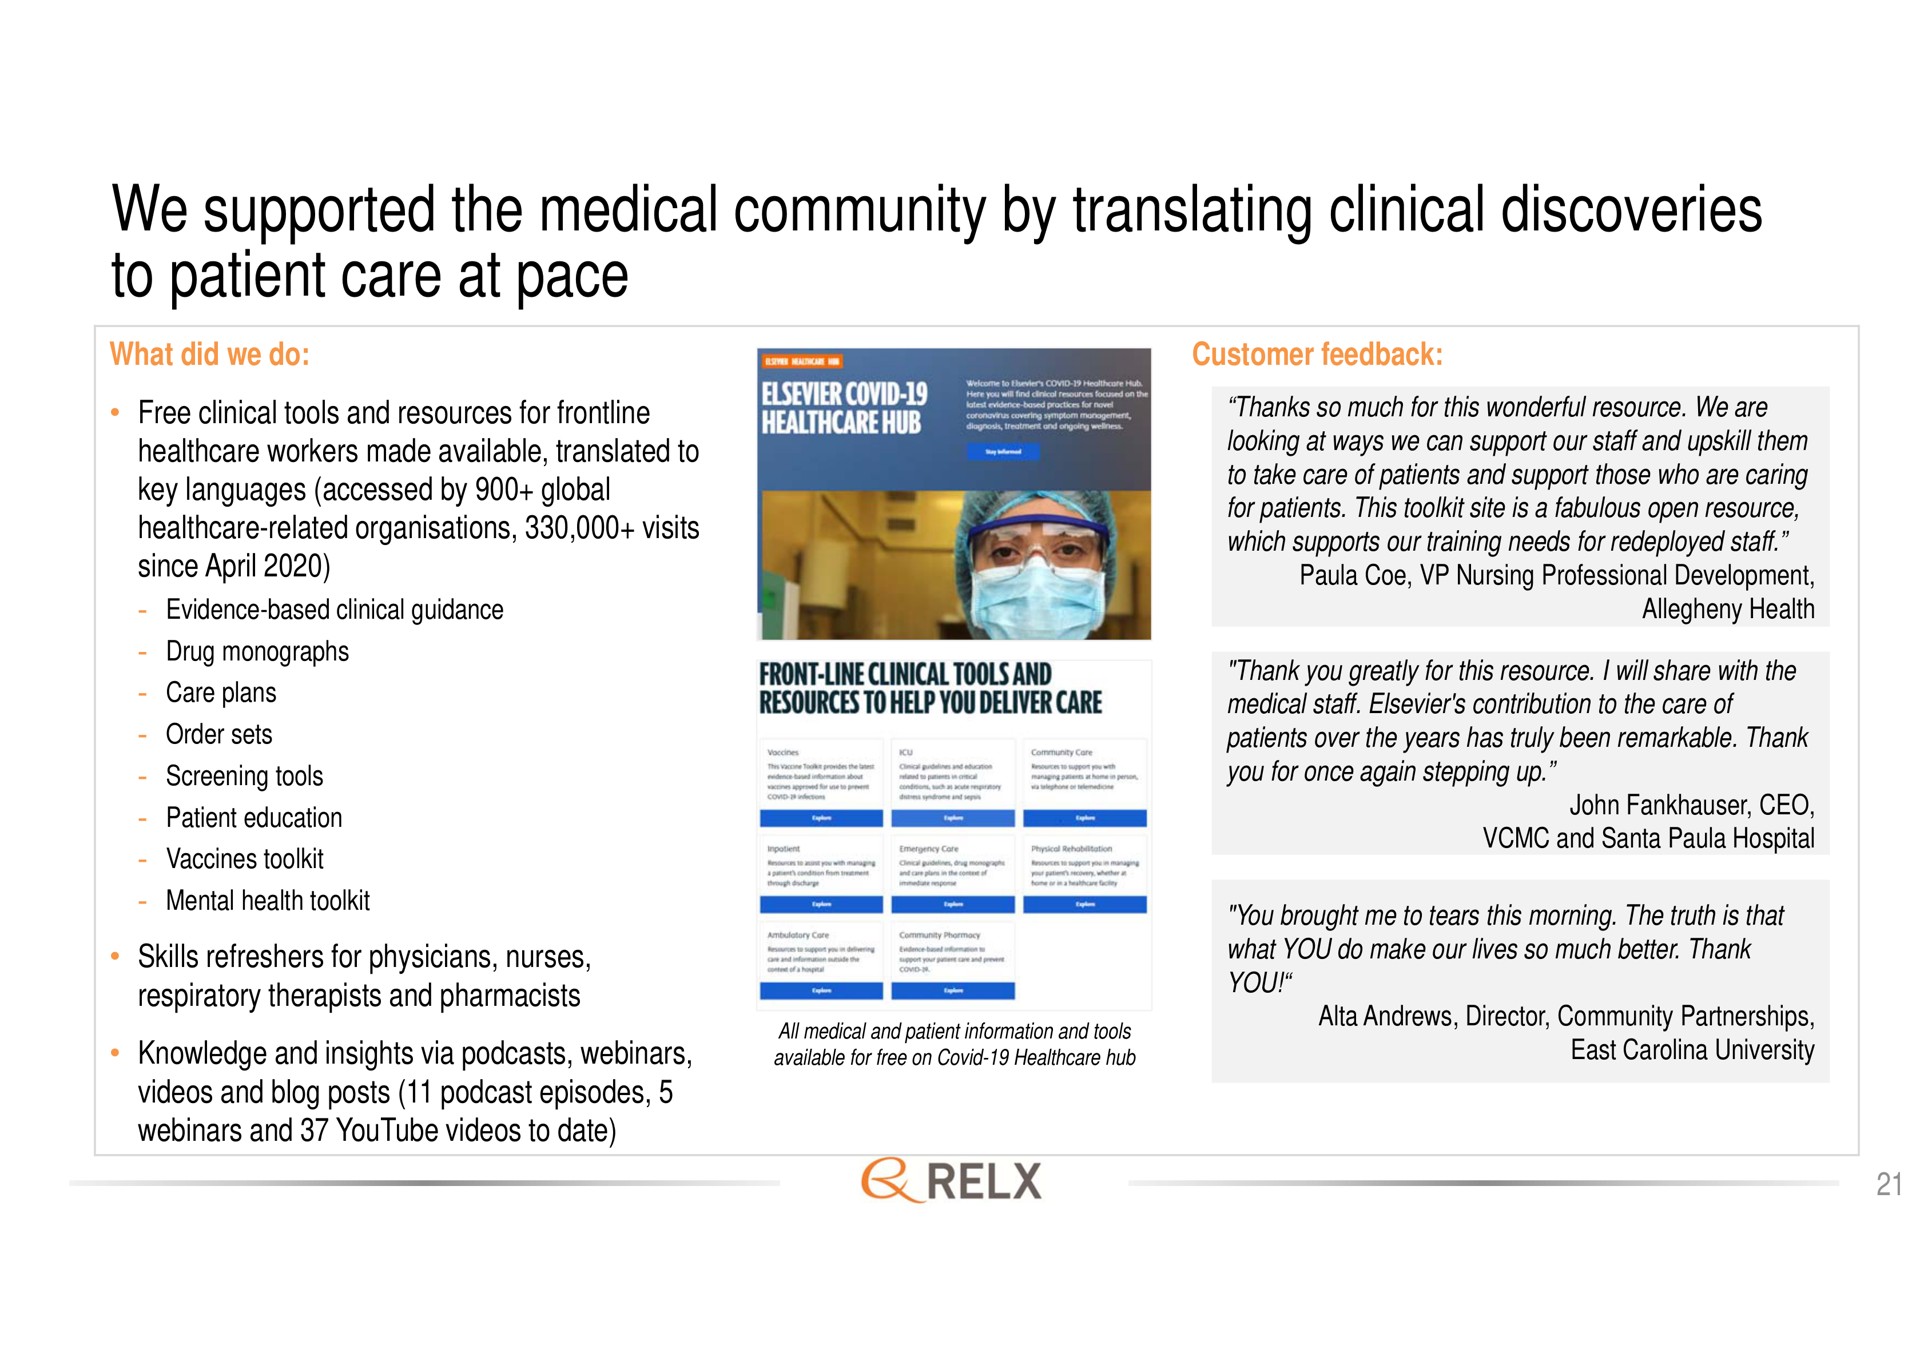 we supported the medical community by translating clinical discoveries to patient care at pace | RELX